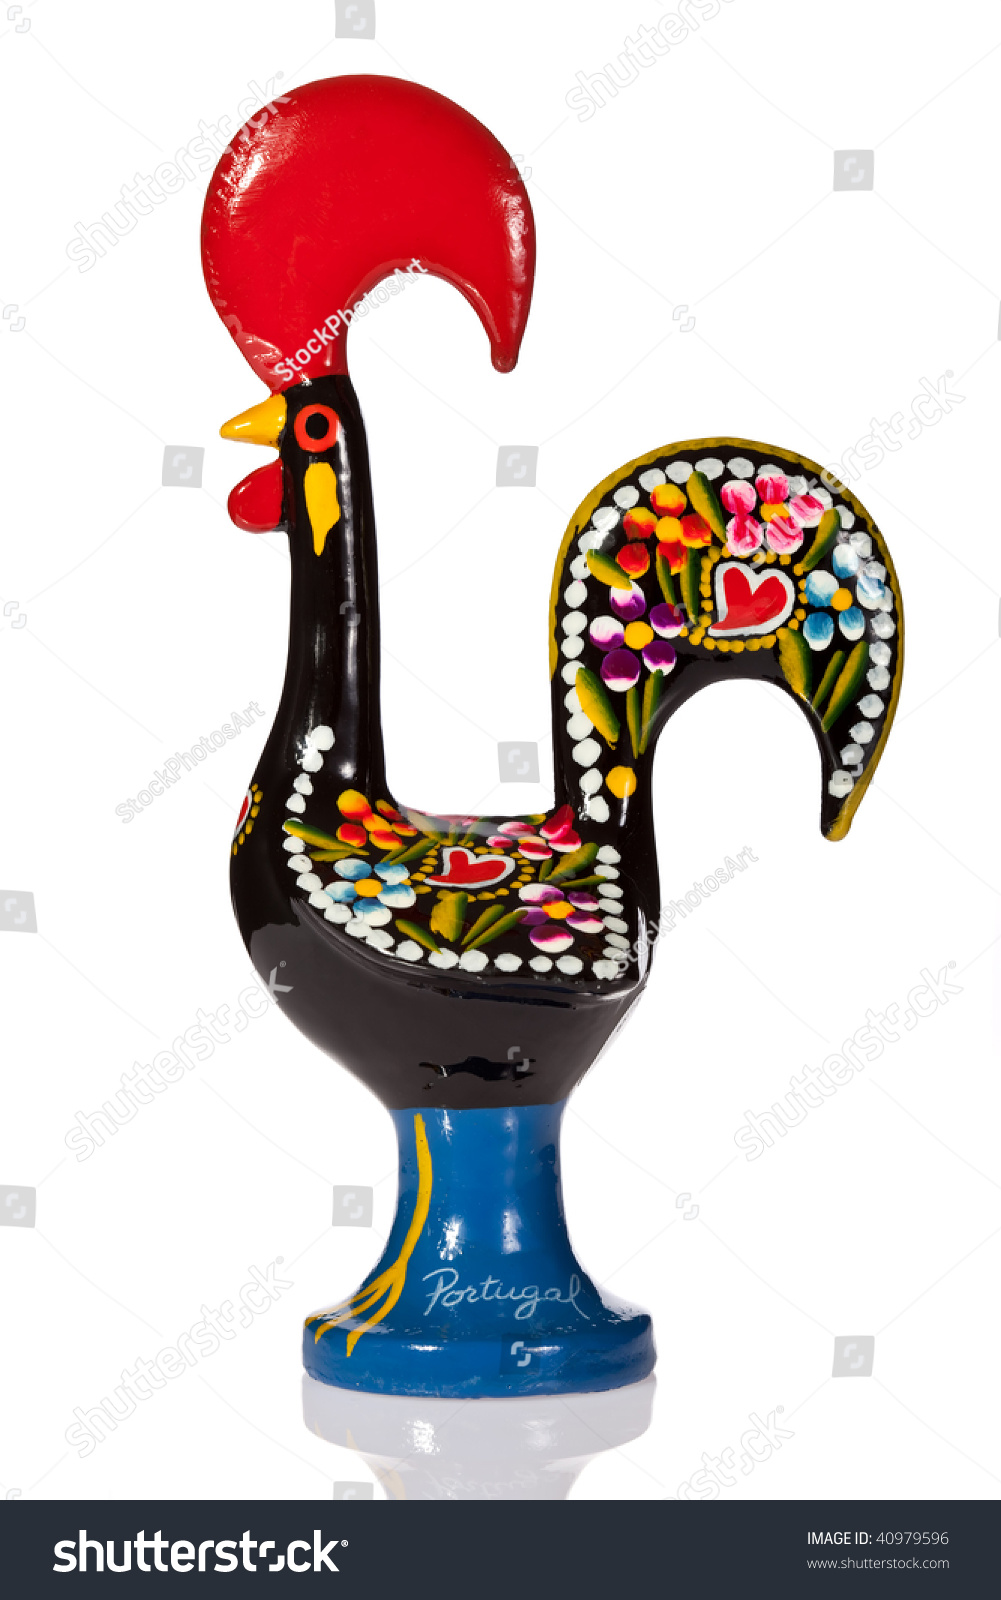 The Galo De Barcelos (Barcelos Rooster), The Unofficial Symbol Of ...